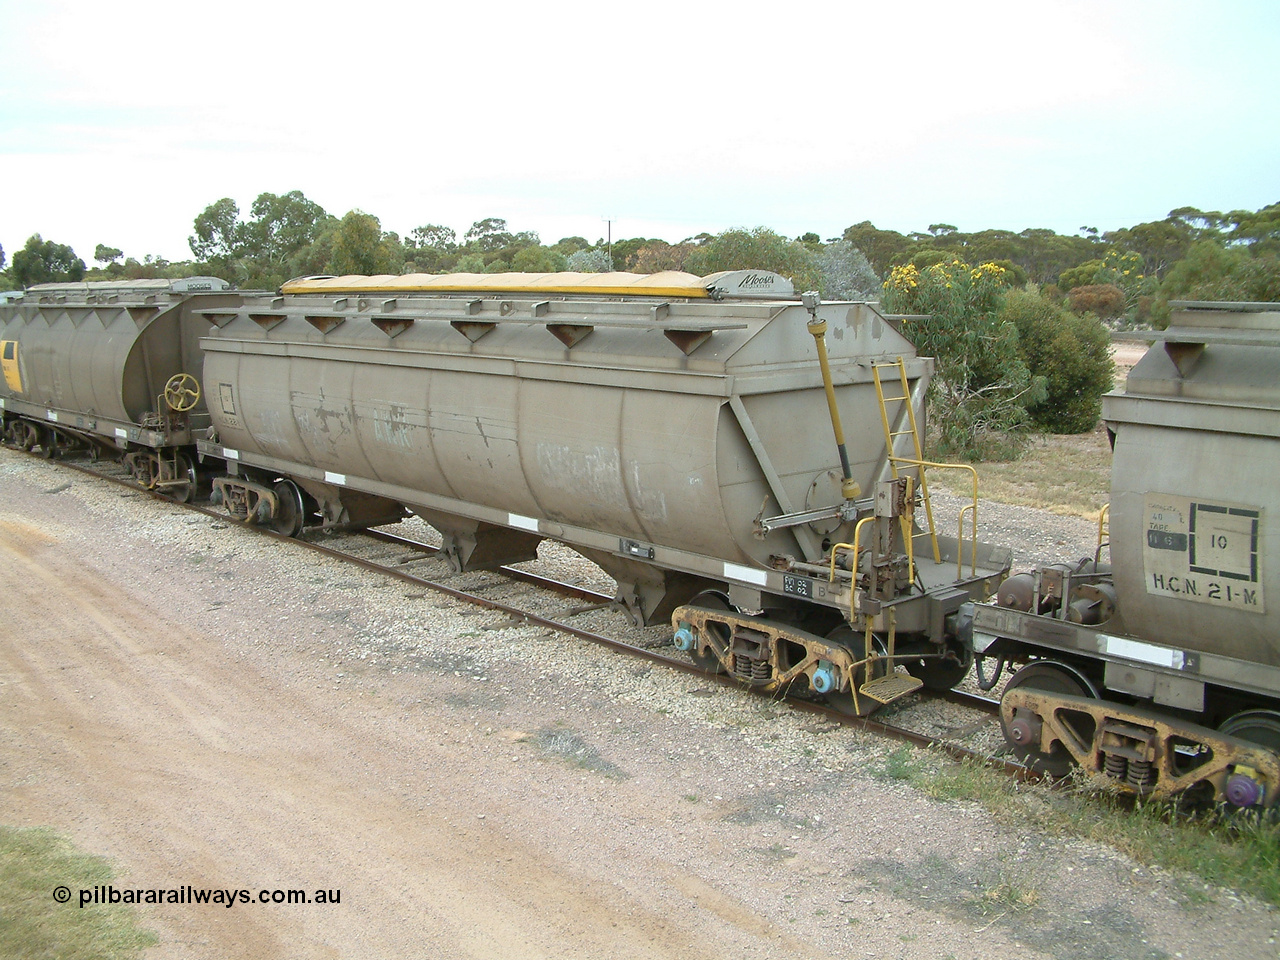 030407 100606
Minnipa, empty grain train bogie grain waggons, HCN type bogie wheat waggon HCN 22 and HCN 21, modified at Islington Workshops in 1978-80 which started life as a Tulloch built NHB type iron ore hopper for the CR on the North Australia Railway in 1968-69 with SAR Islington Workshops built HAN type bogie wheat waggon, HAN 41. 7th April, 2003.
Keywords: HCN-type;HCN22;SAR-Islington-WS;rebuild;Tulloch-Ltd-NSW;NHB-type;NHB1576;